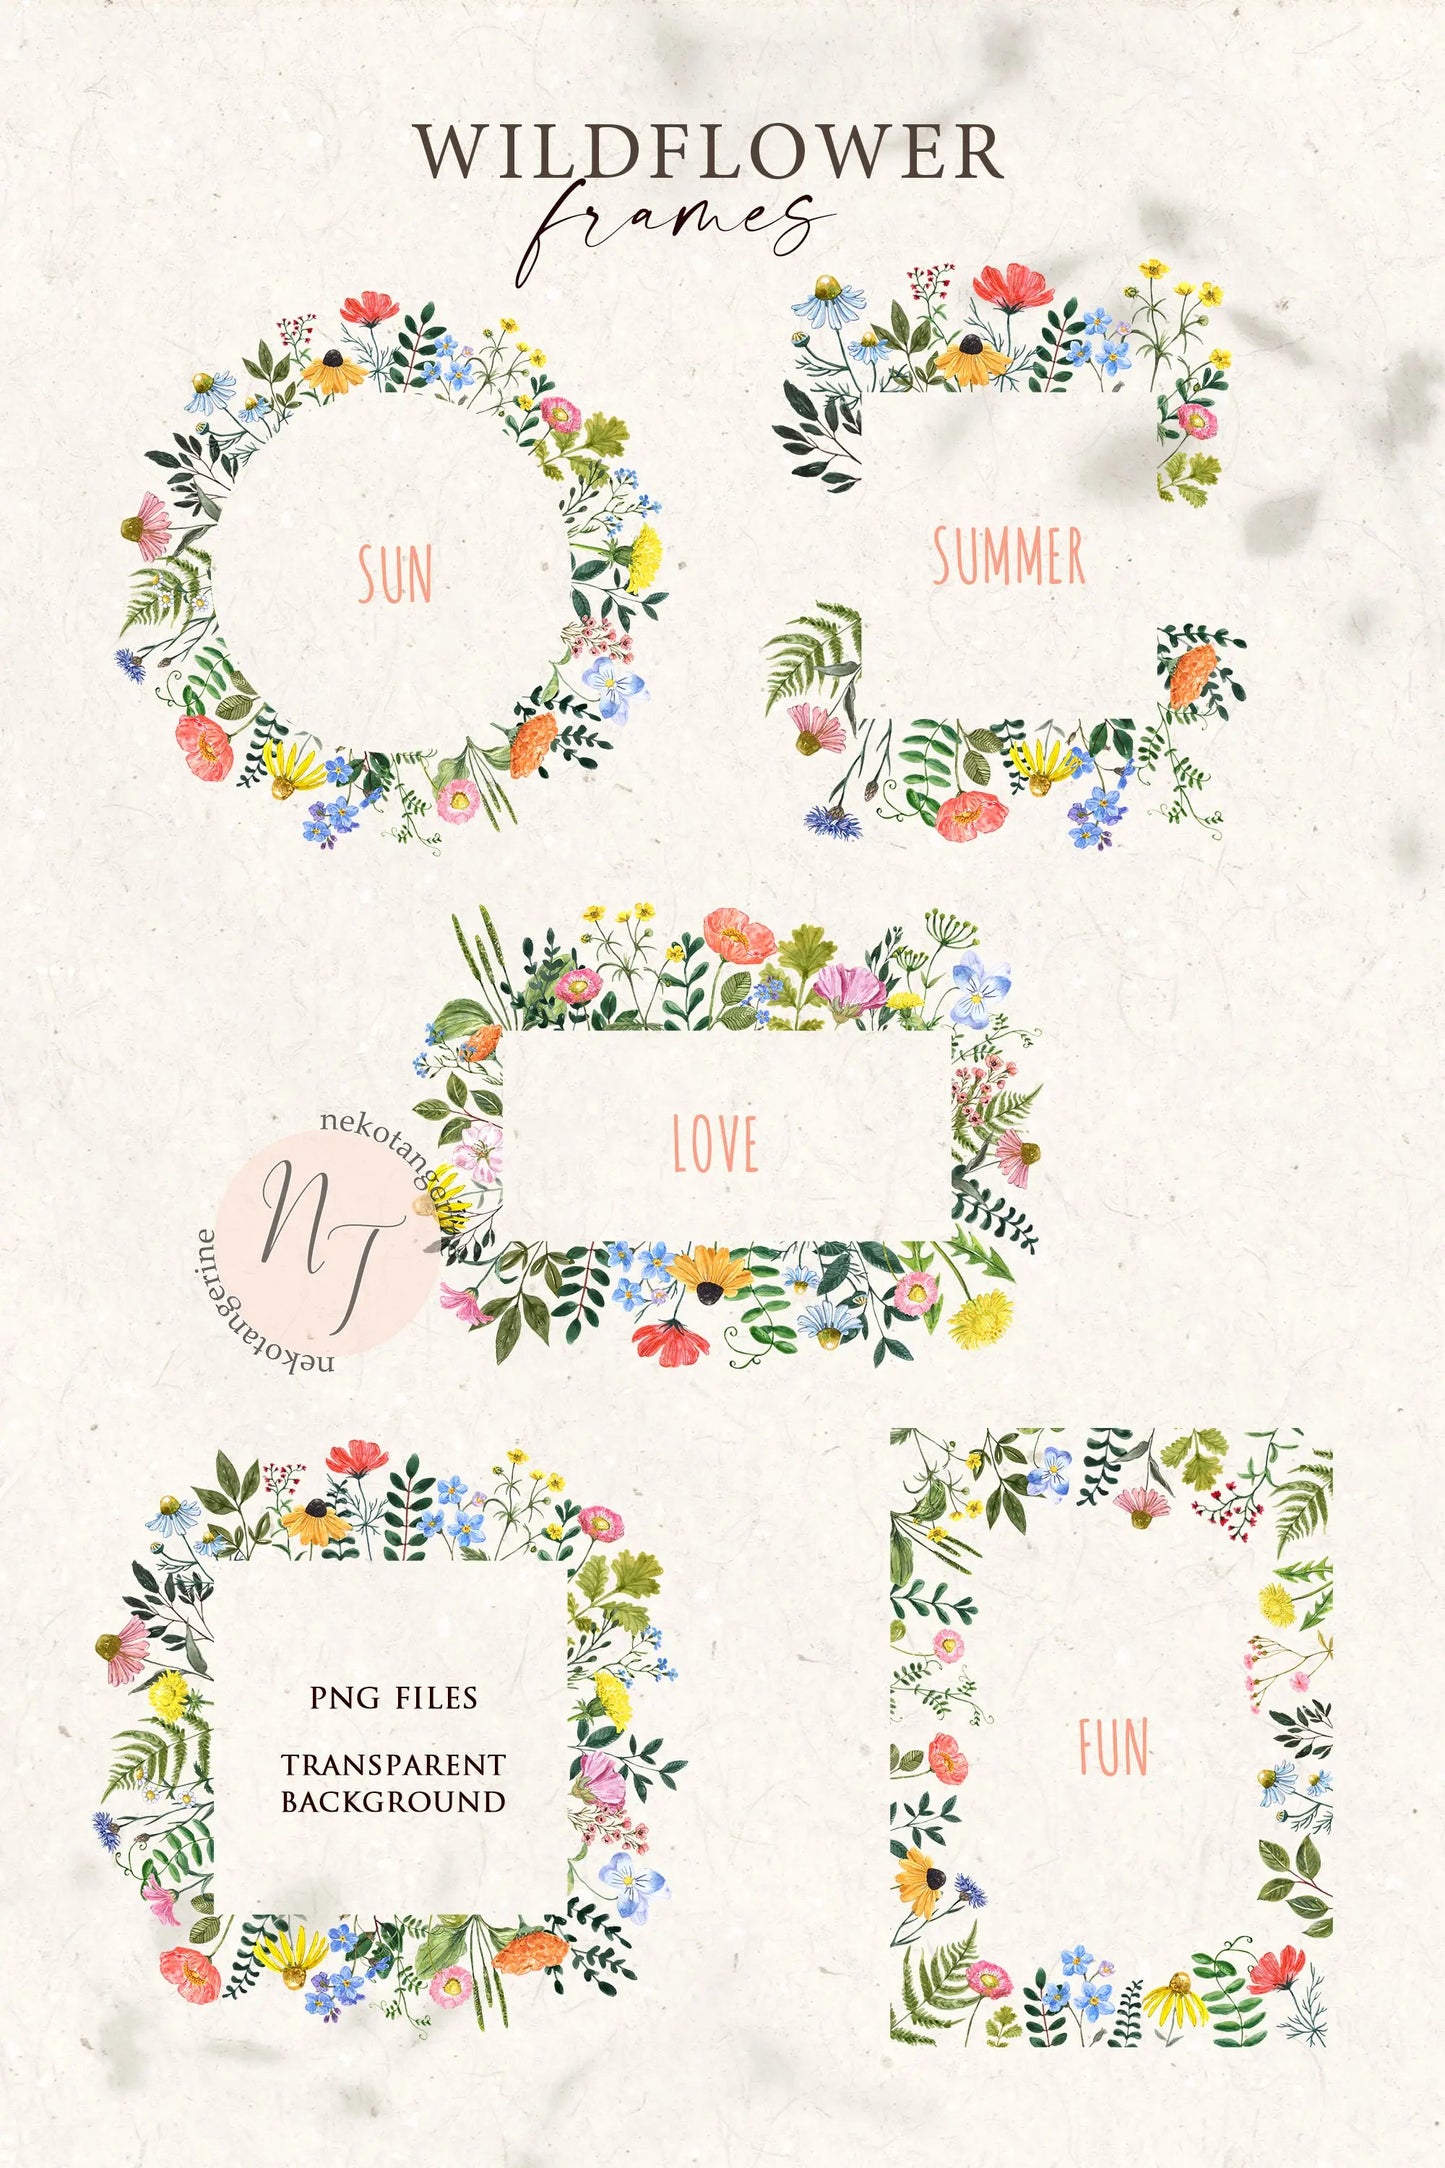 Watercolor Meadow Wildflower Frames and Borders clipart, watercolor wildflower clipart PNG